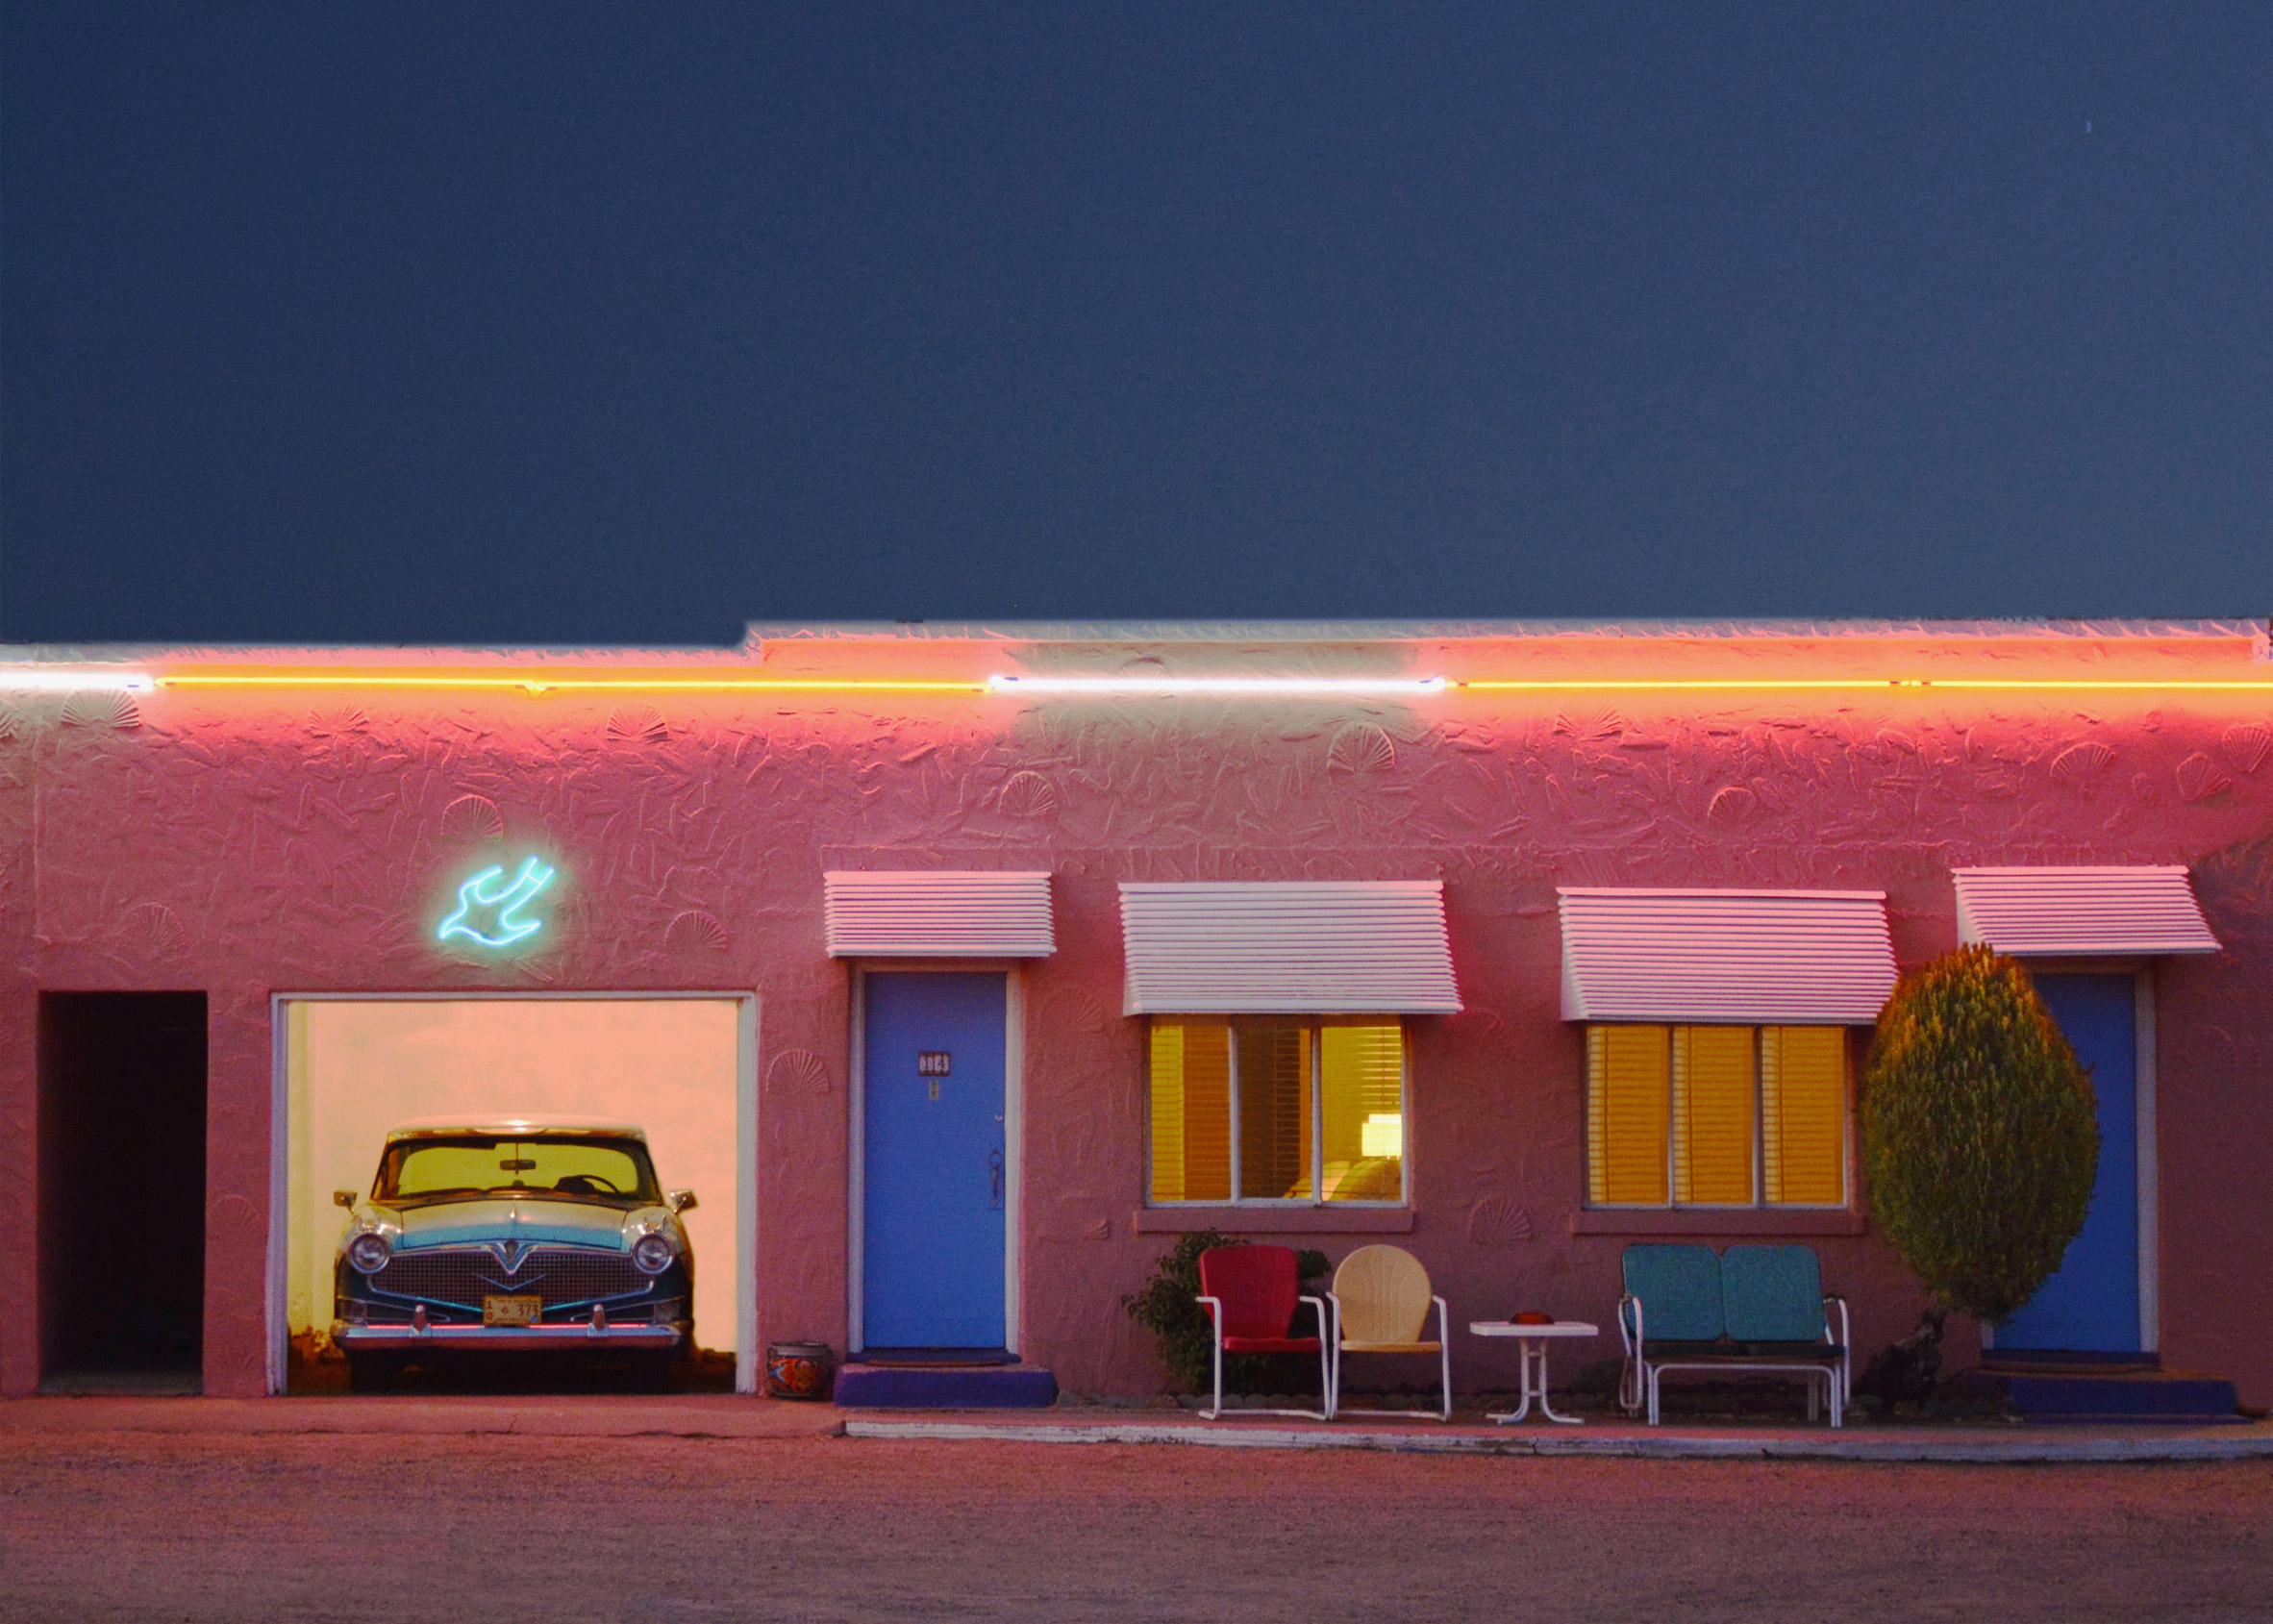 The Blue Swallow motel